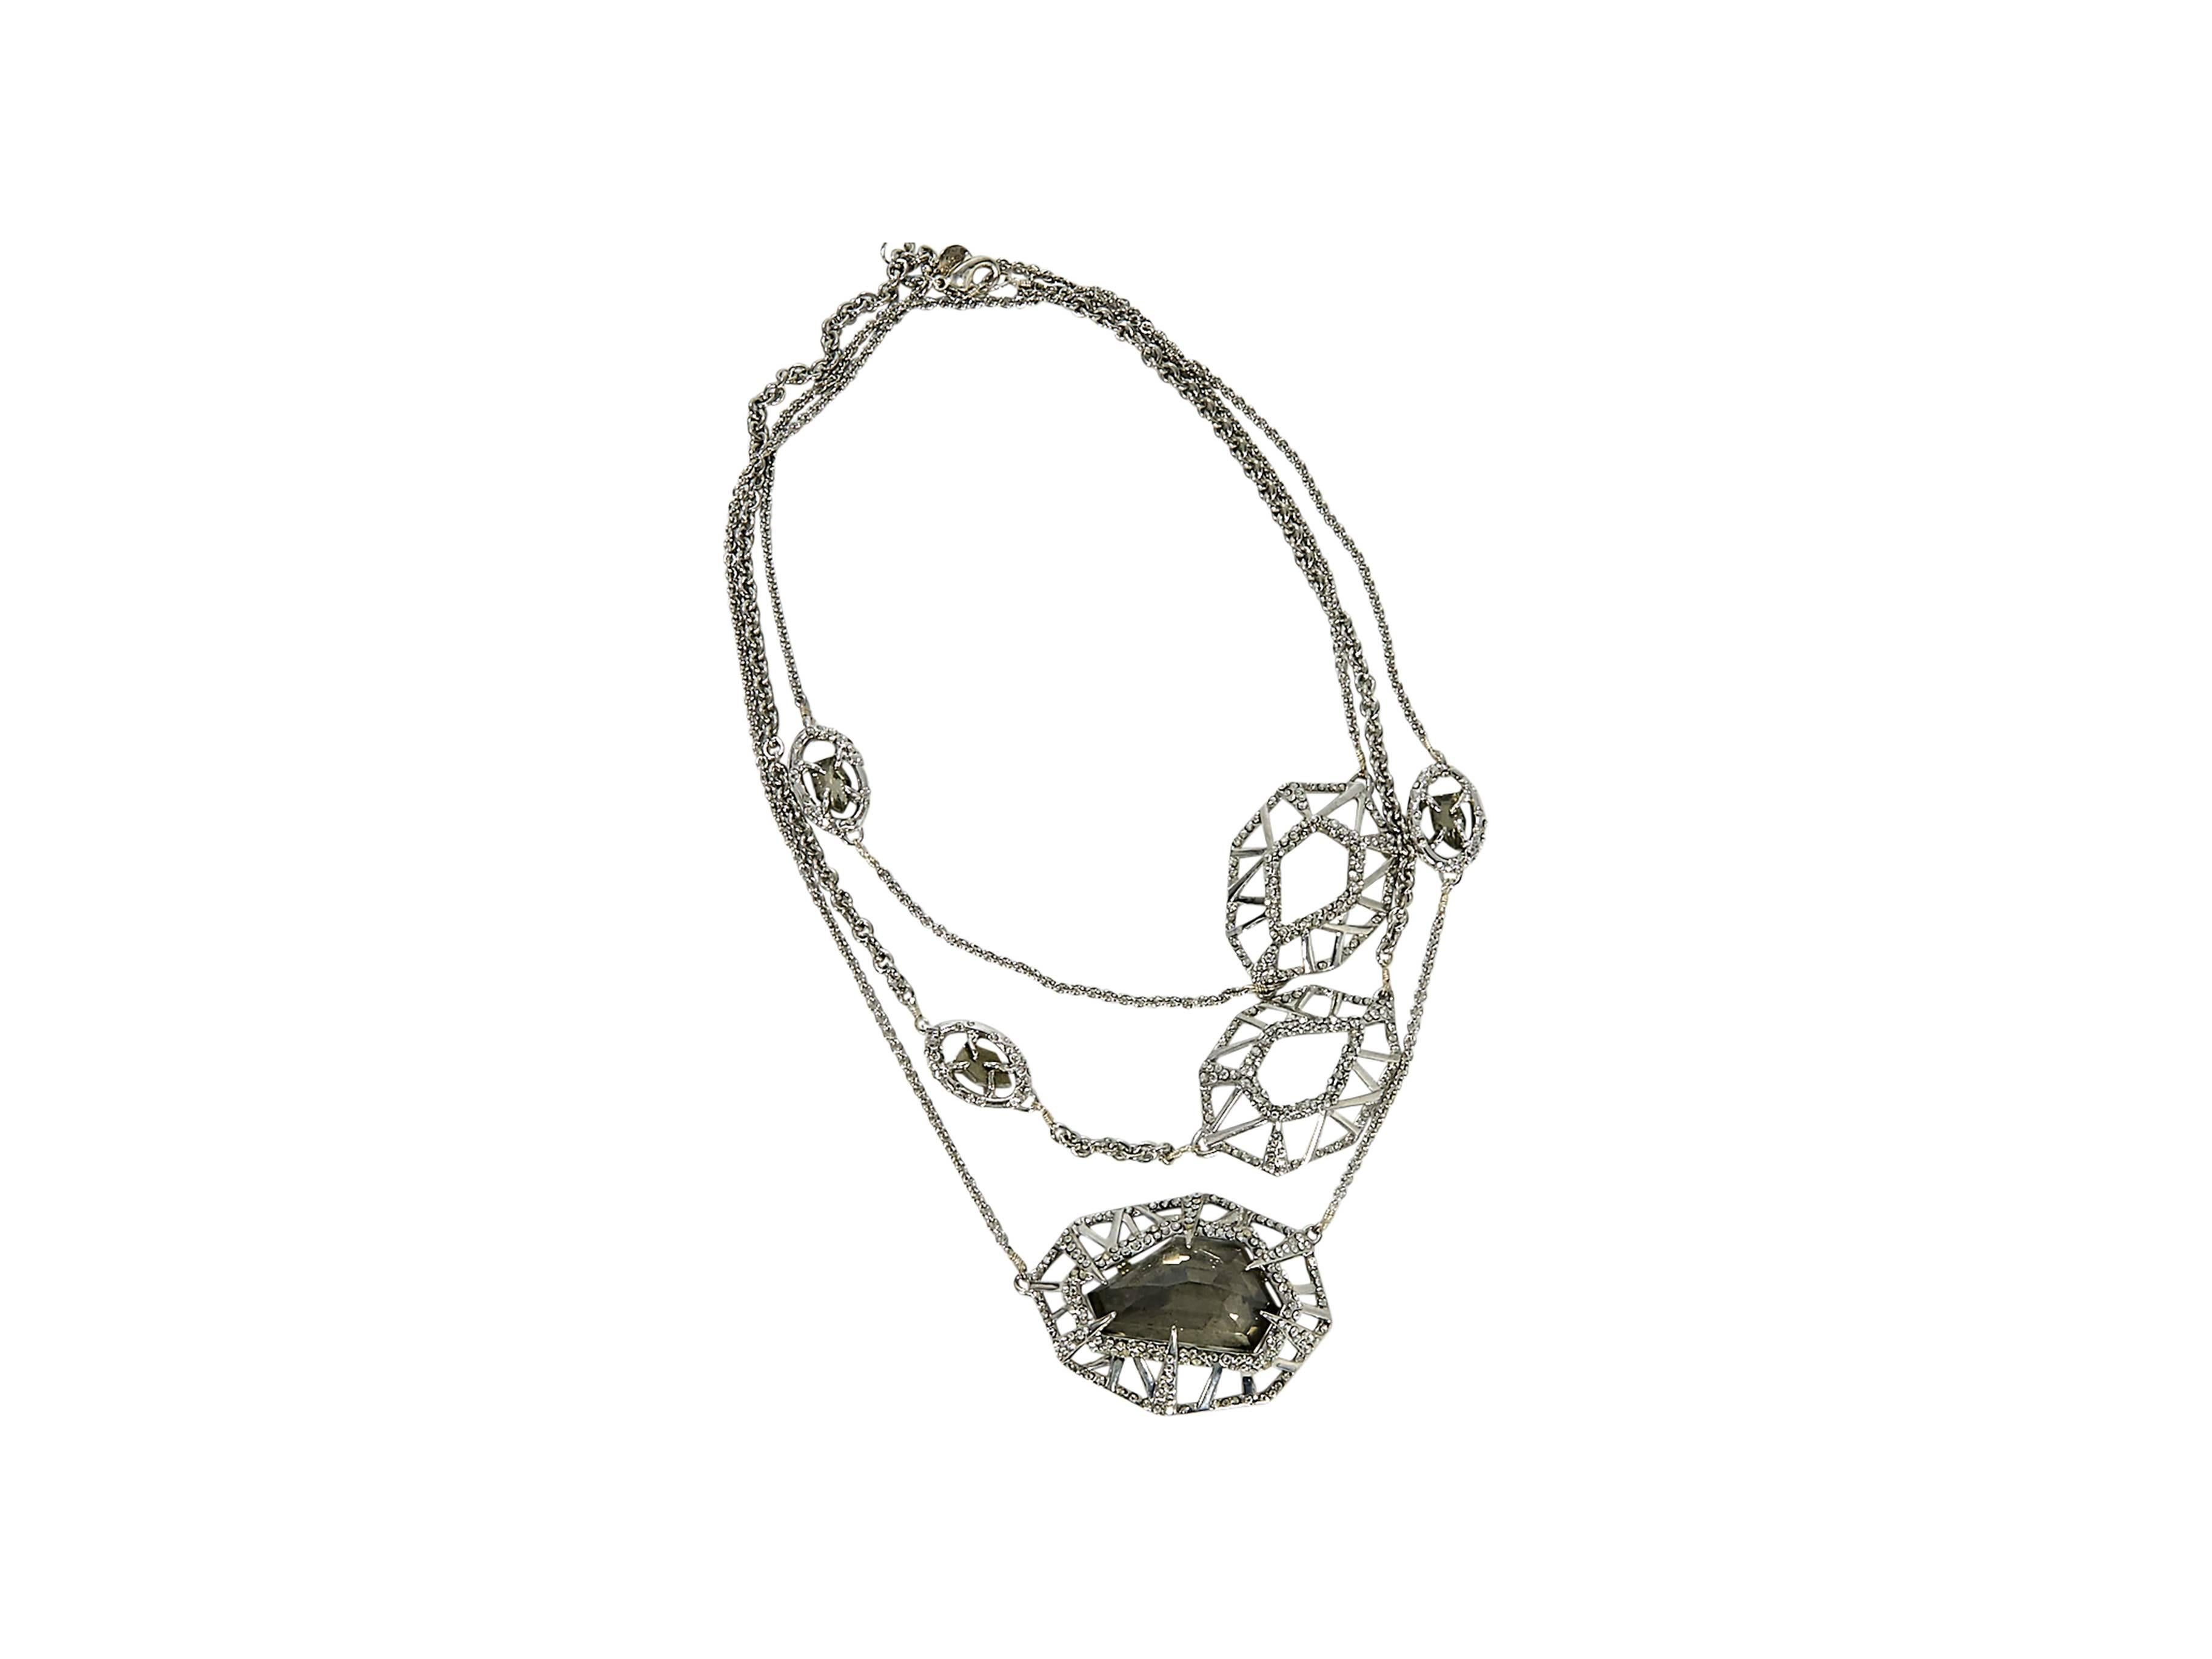 Product details:  Silvertone tiered necklace by Alexis Bittar.  Accented with faceted beads and charms.  Embellished with crystals.  Adjustable lobster clasp closure.  
Condition: Pre-owned. Very good.

Est. Retail $ 325.00
